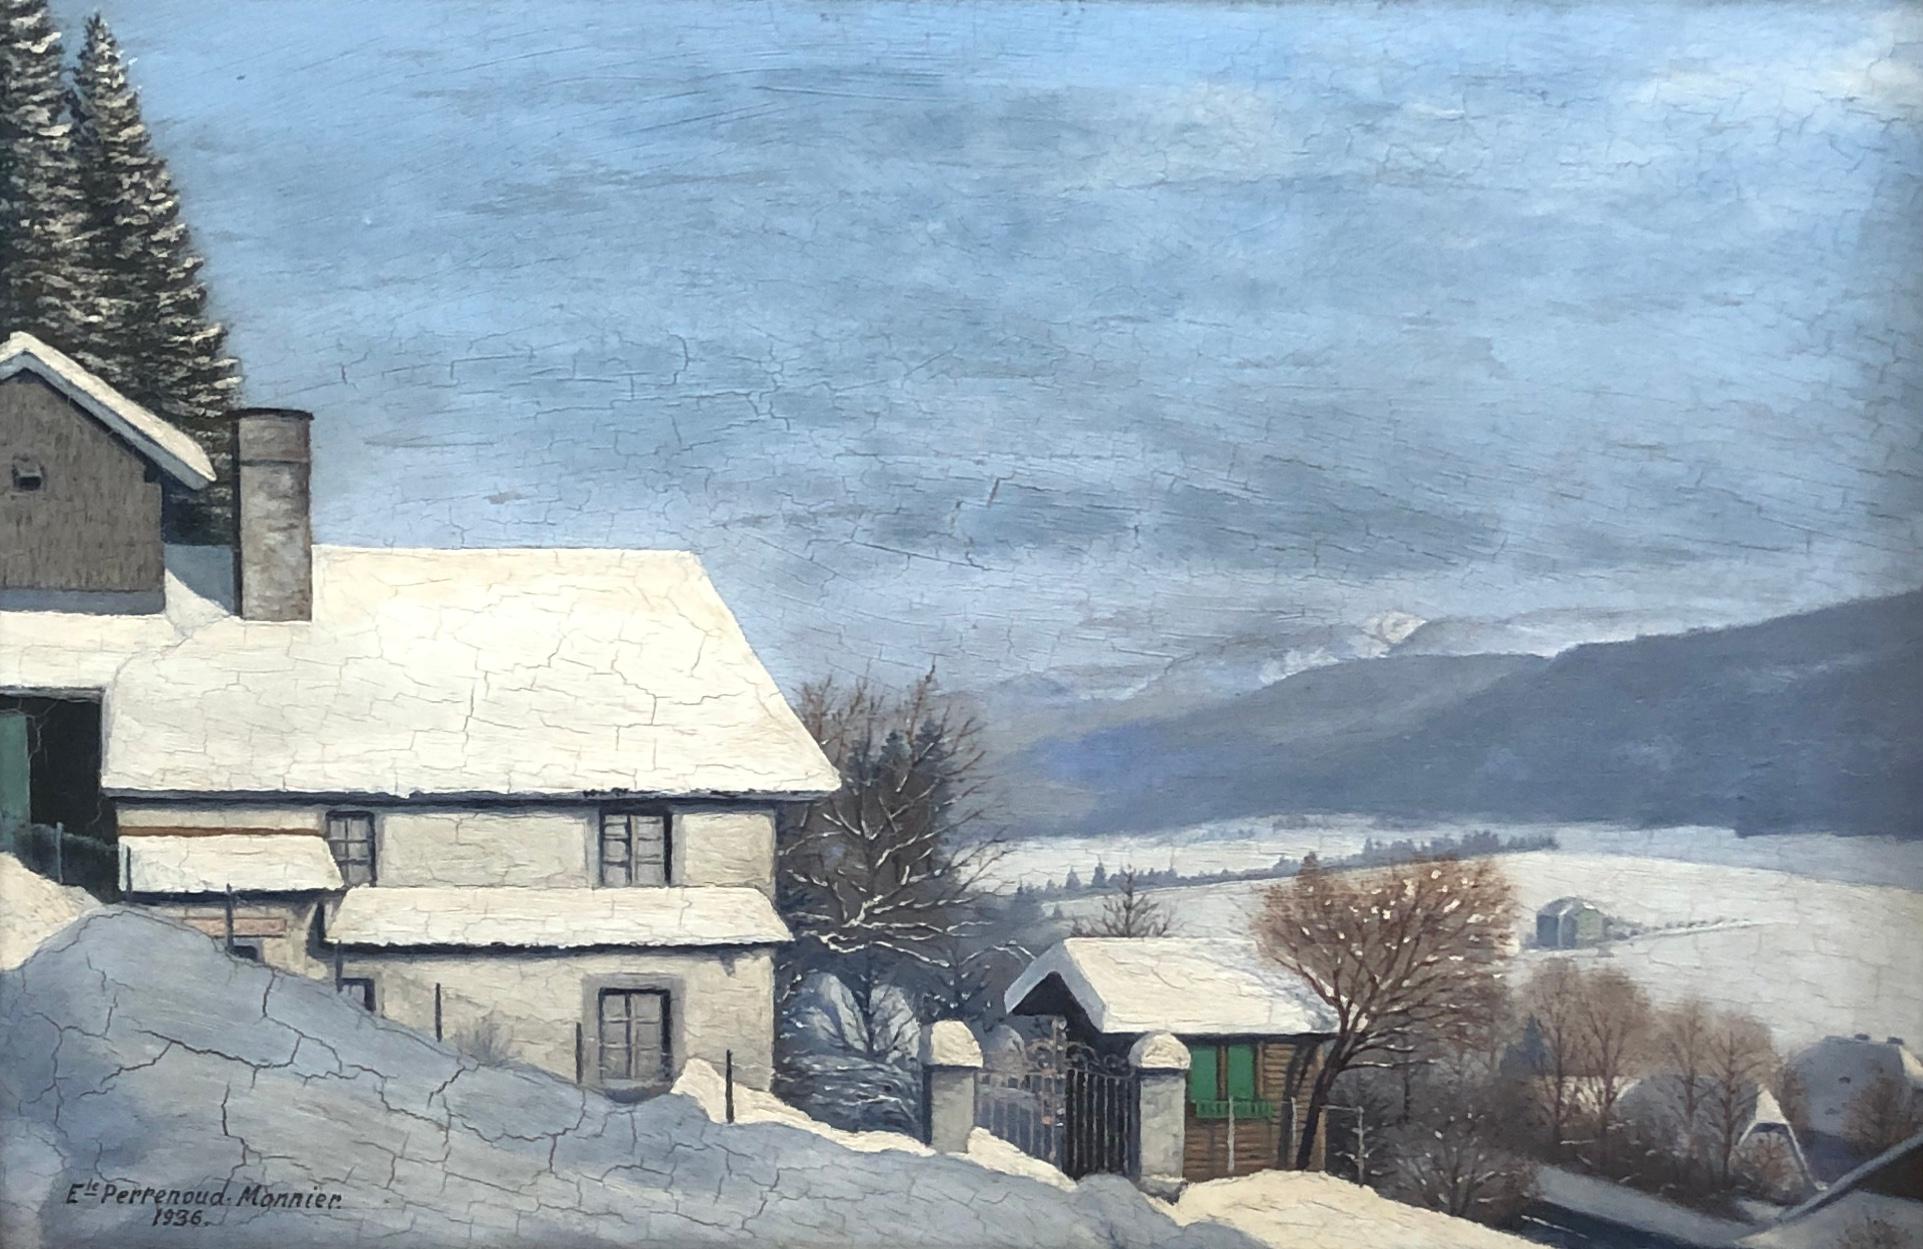 E. Perrenoud -Monnier Landscape Painting - Town in winter